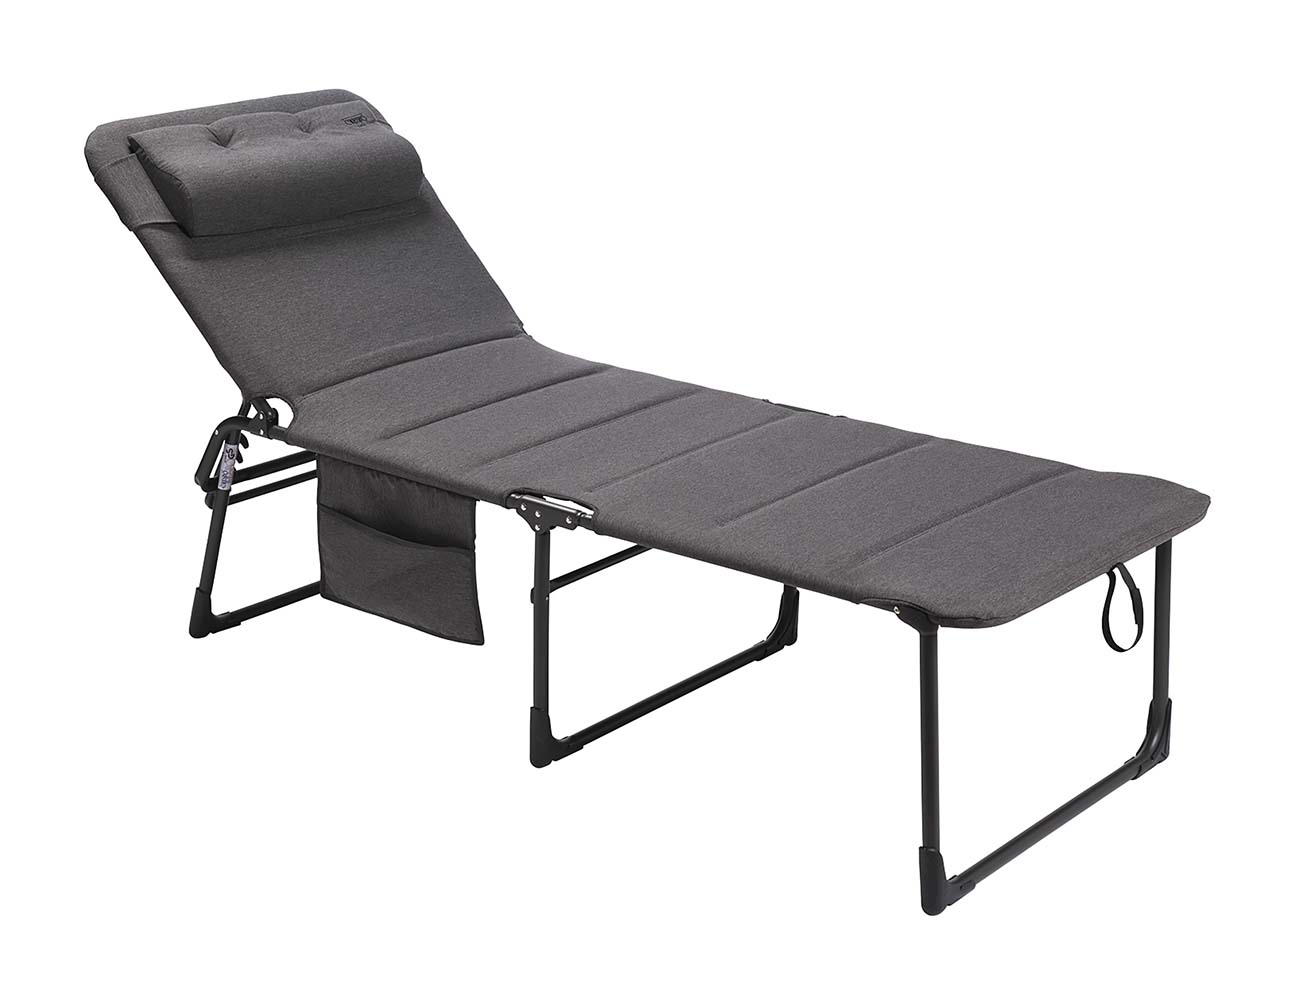 1148279 A very luxurious and one of the most comfortable sun loungers. This foldable bed, adjustable in 5 positions, is equipped with an extra thick and sturdy 3D padded foam filling. The padded fabric wraps entirely around the frame, where the luxurious fabric is attached to the back, creating a very pleasant seating experience. Additionally, the elastics run entirely over the back for increased comfort, and the finishing adds a stylish touch. This padded fabric also does not retain moisture. The sun lounger is extra wide and has easy access. On the side, there is a convenient organizer for storing a book, magazines, a mobile phone, etc. After use, this bed can be quickly and easily folded flat.